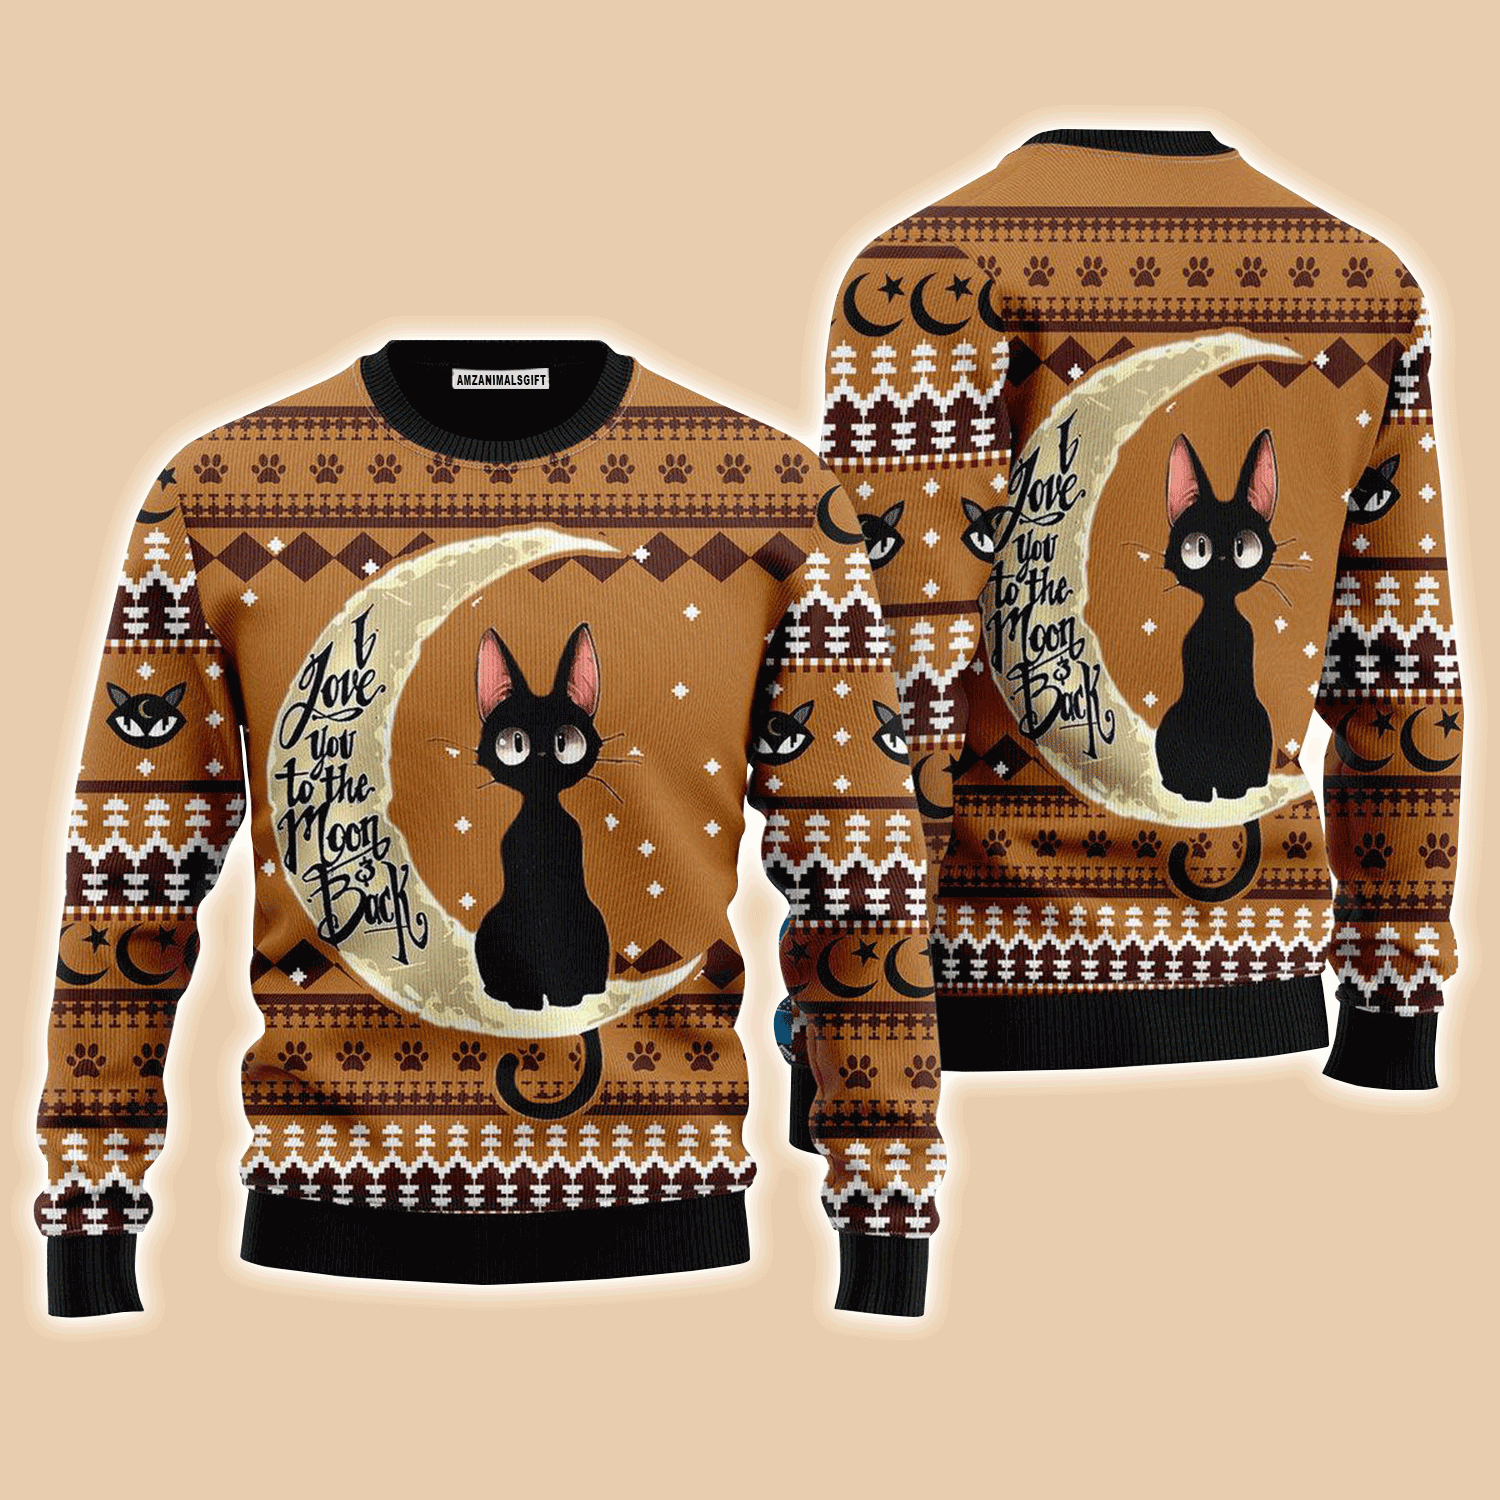 Black Cat Moon And Back Sweater, Ugly Christmas Sweater For Men & Women, Perfect Outfit For Christmas New Year Autumn Winter